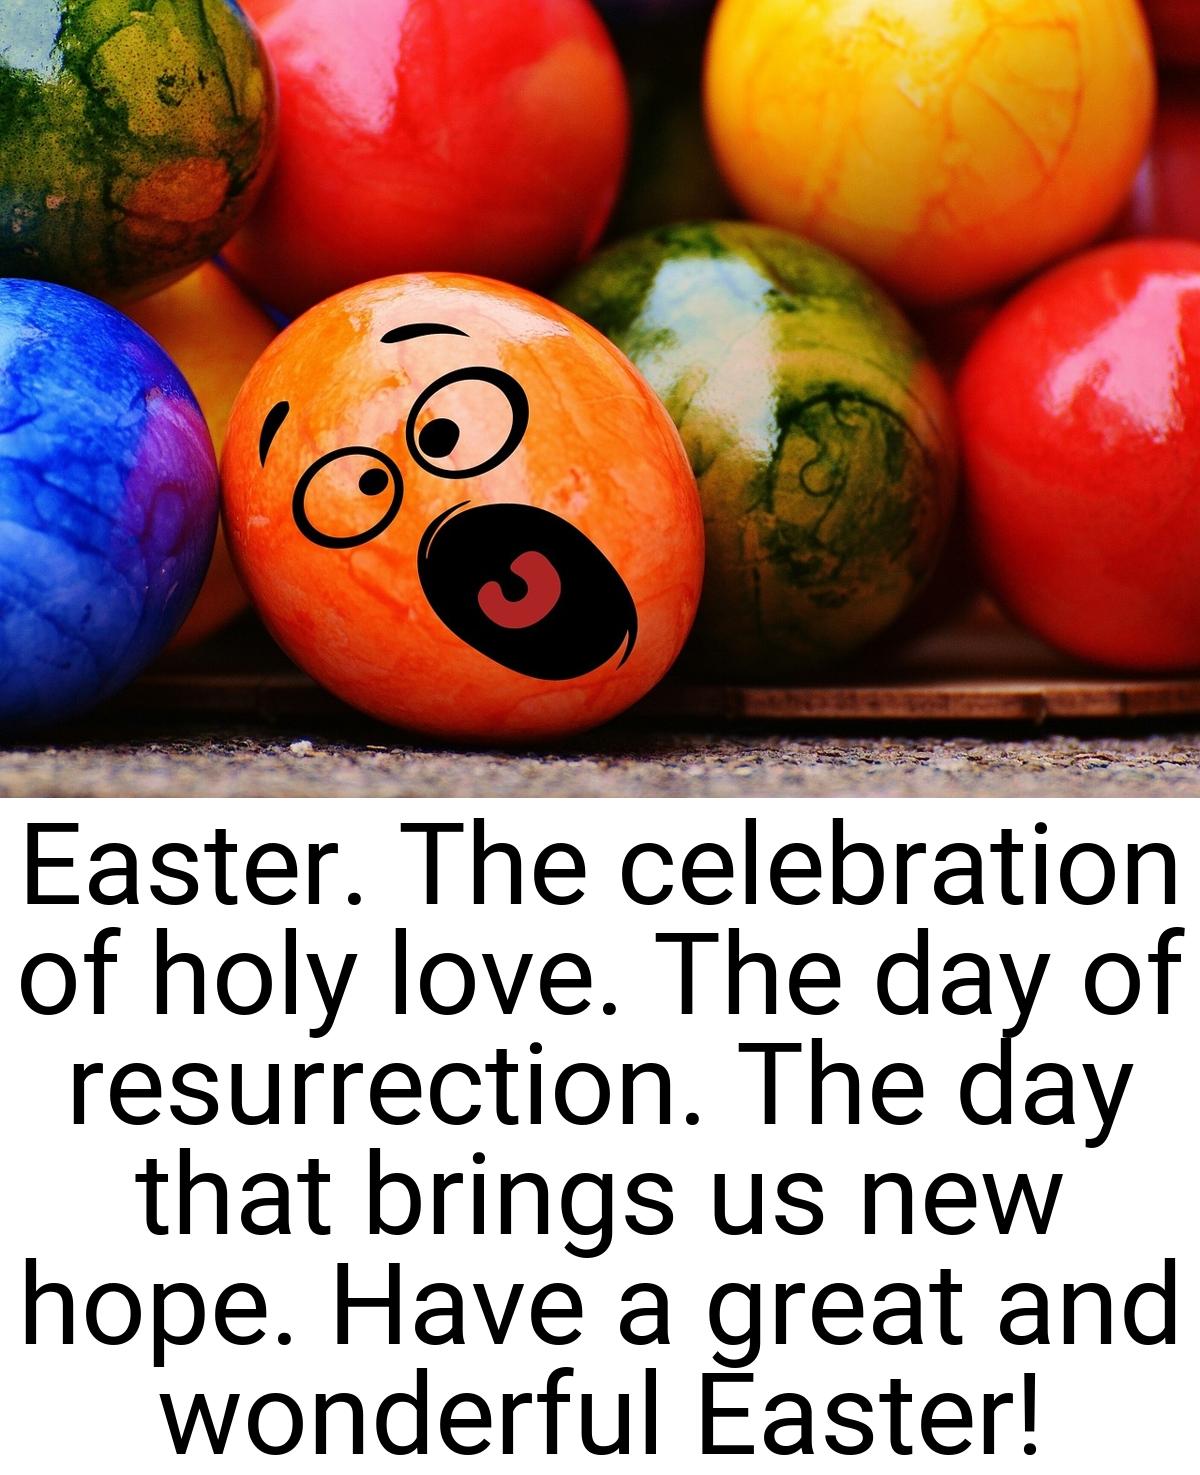 Easter. The celebration of holy love. The day of